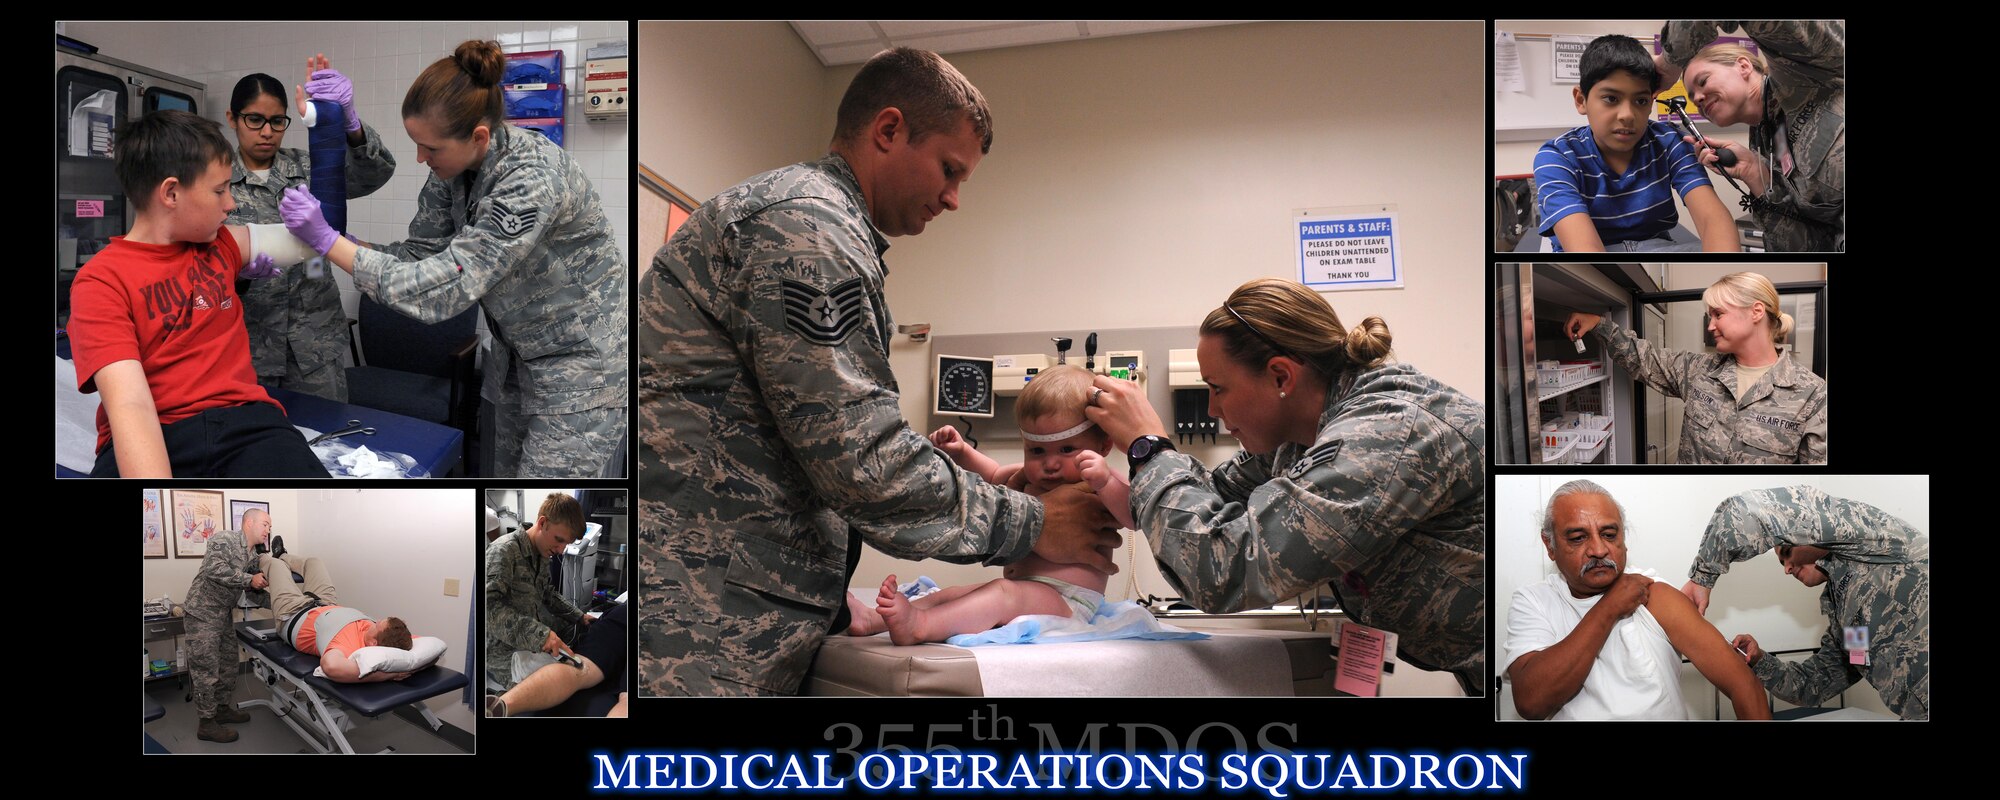 The 355th Medical Operations Squadron ensures combatant commanders that their warfighters are medically fit-to-fight and provides combat-ready medical personnel to execute medical support of missions worldwide. The squadron provides medical care to maximize the health and welfare of our current and retired warriors and their family members both in theater and at home.